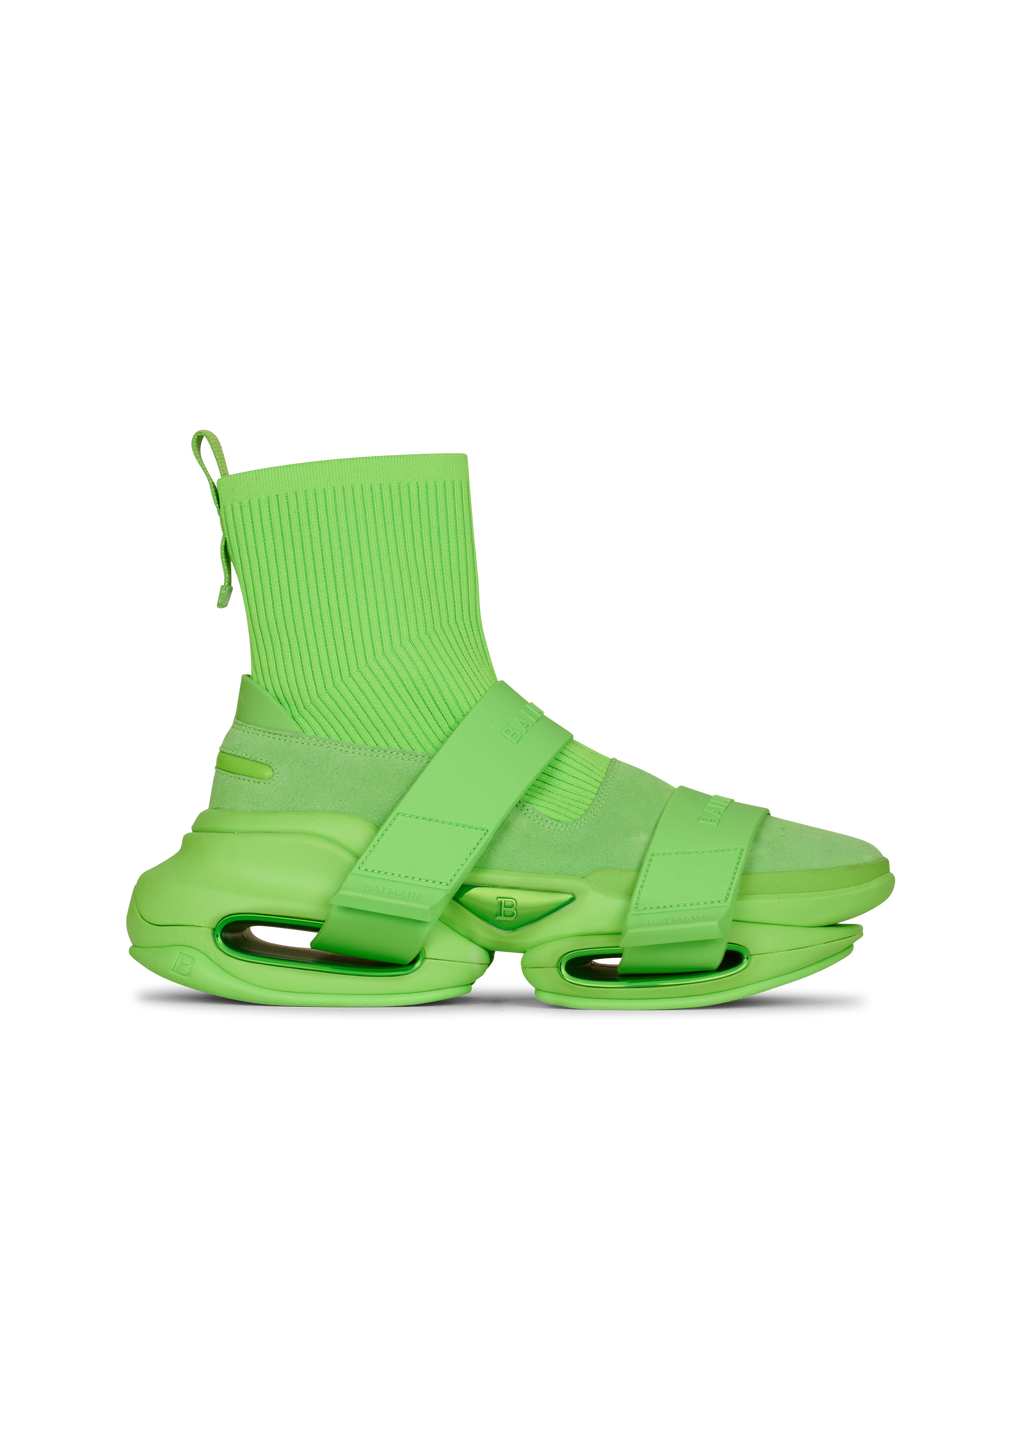 Neoprene and knit B-Bold high-top sneakers with straps, green, hi-res